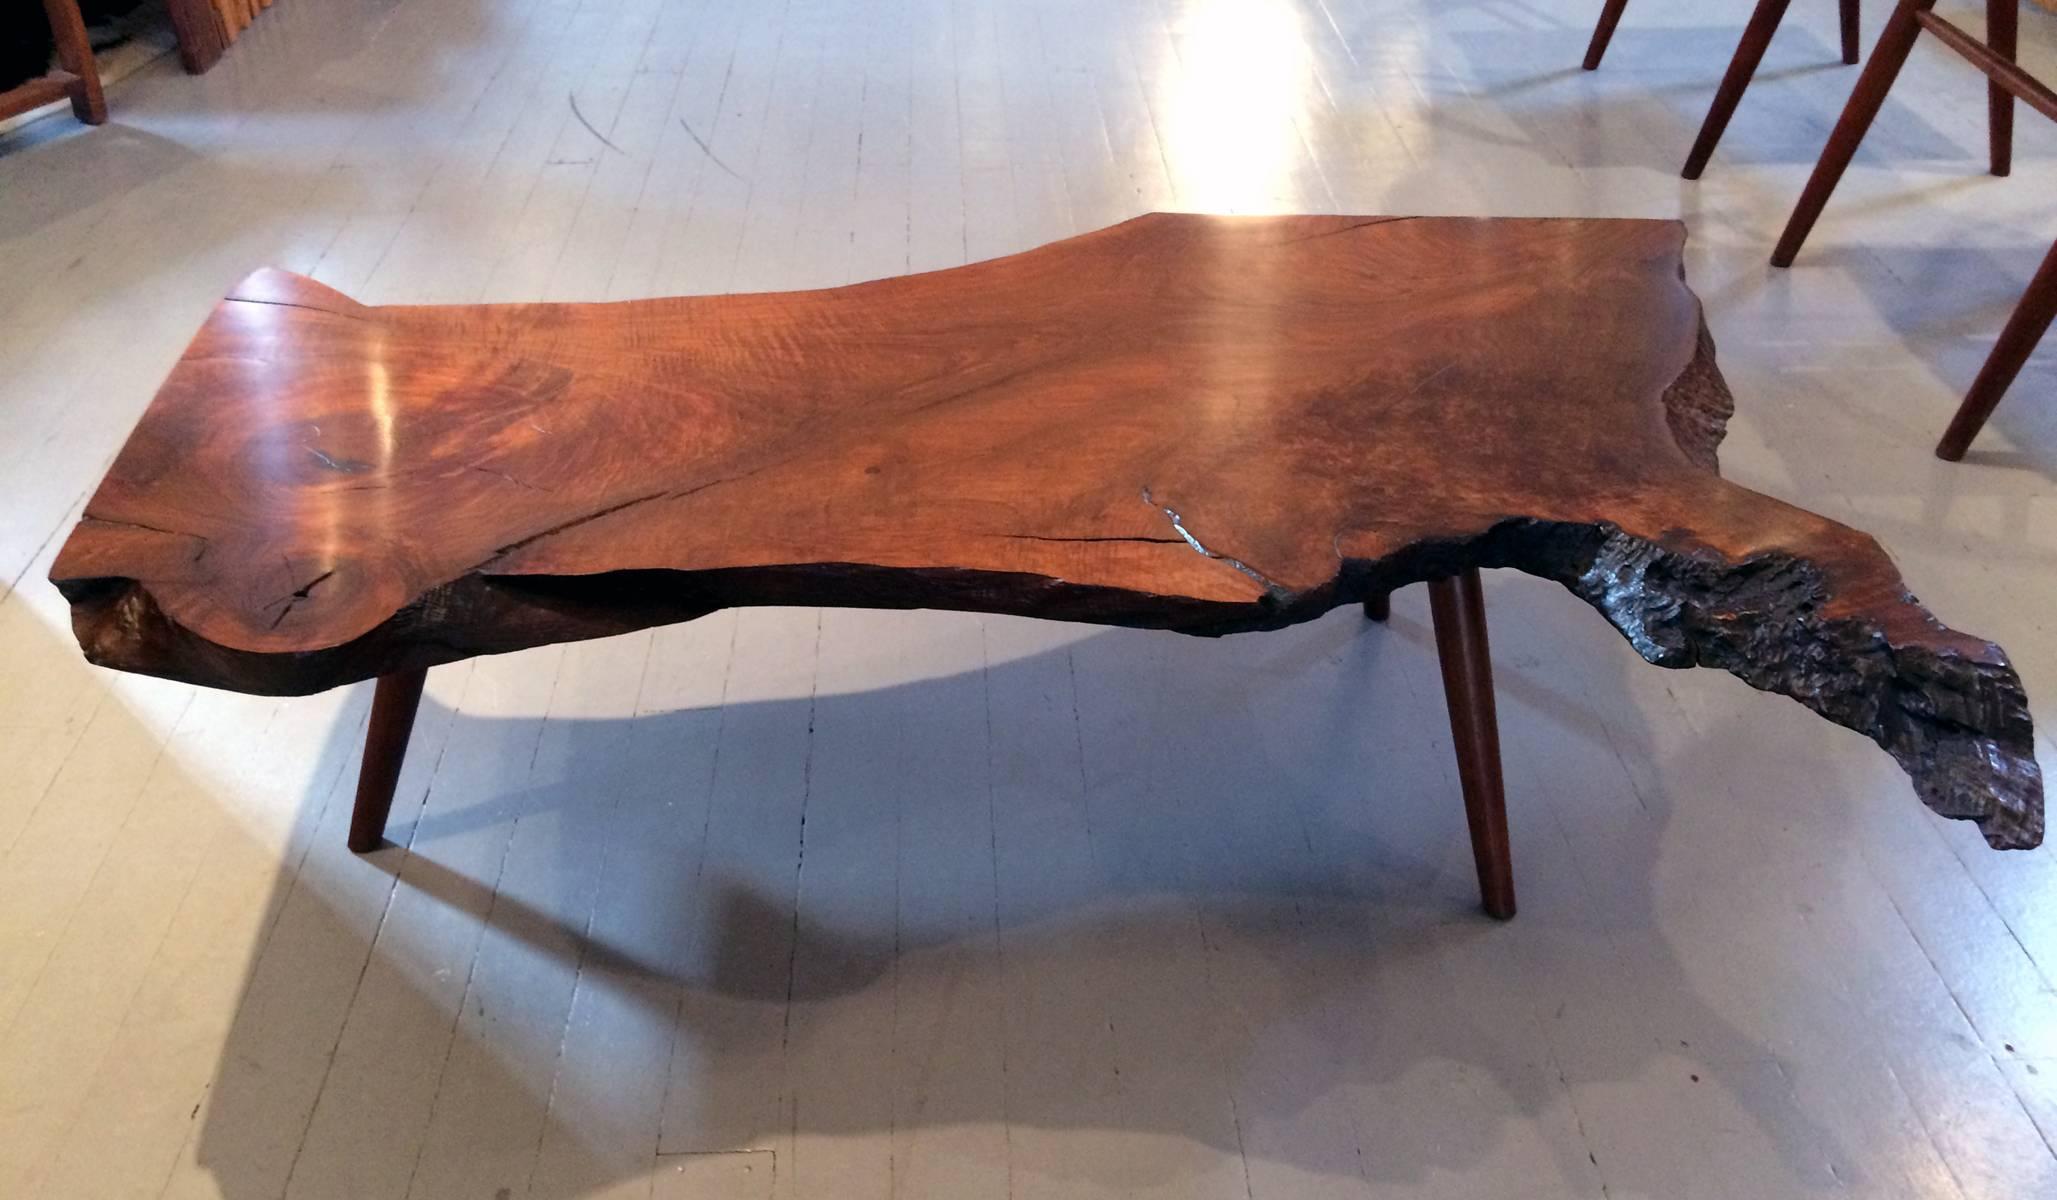 One of the earliest walnut slab coffee table handcrafted by George Nakashima in hi New Hope Studio. It was purchased by the original owner in 1959 and cherished in the family ever since. The walnut slab on top resembles the shape of America and the